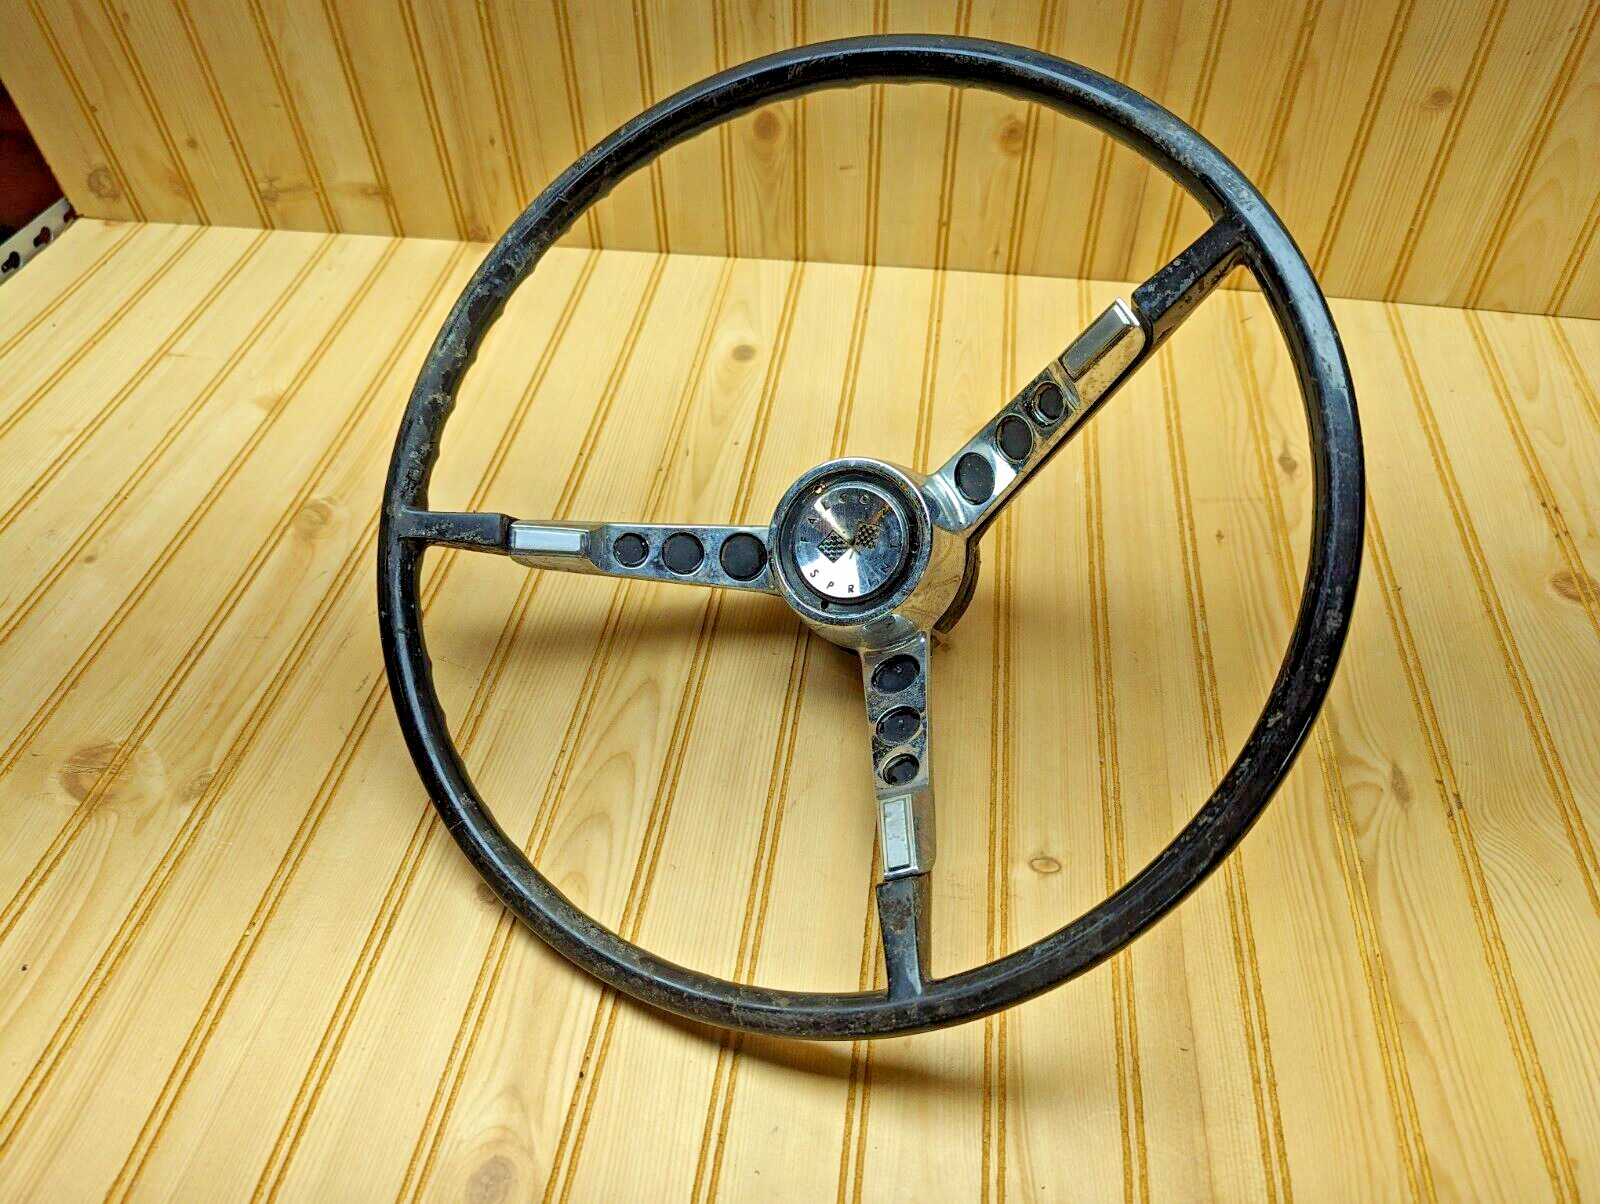 1964 1965 Ford Falcon Sprint Original Steering Wheel with 3-Spoke Horn Ring